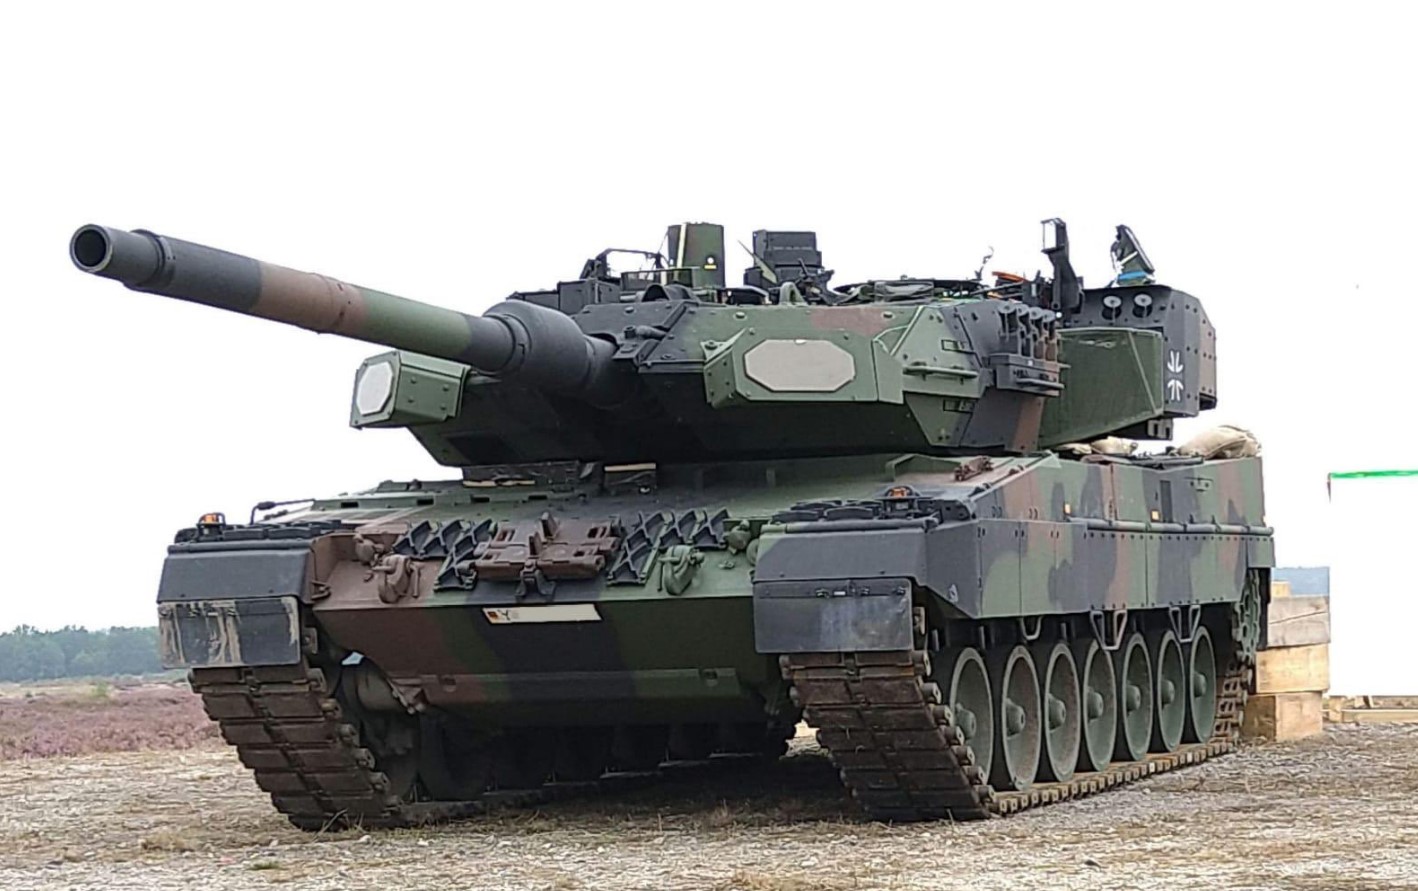 German-Leopard-tanks-complete-first-live-fire-tests-with-Trophy-active-protection-system.jpg